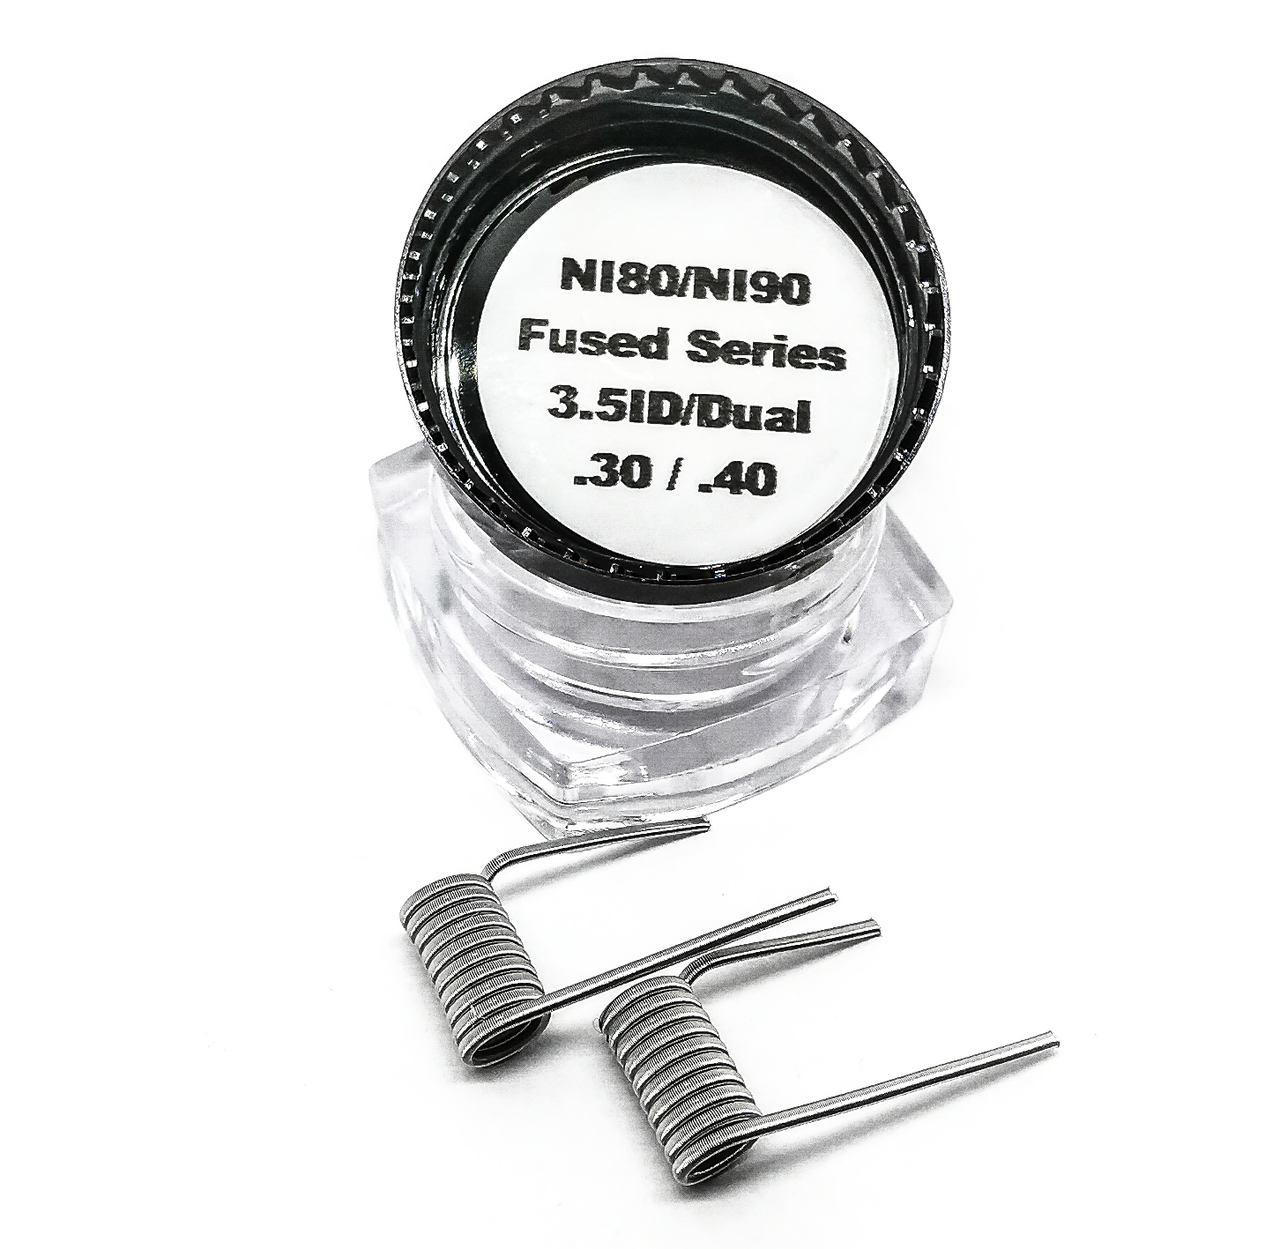 Ni80/Ni90 Fused Series Coils By The Kilted Devil handmade rda coils UK